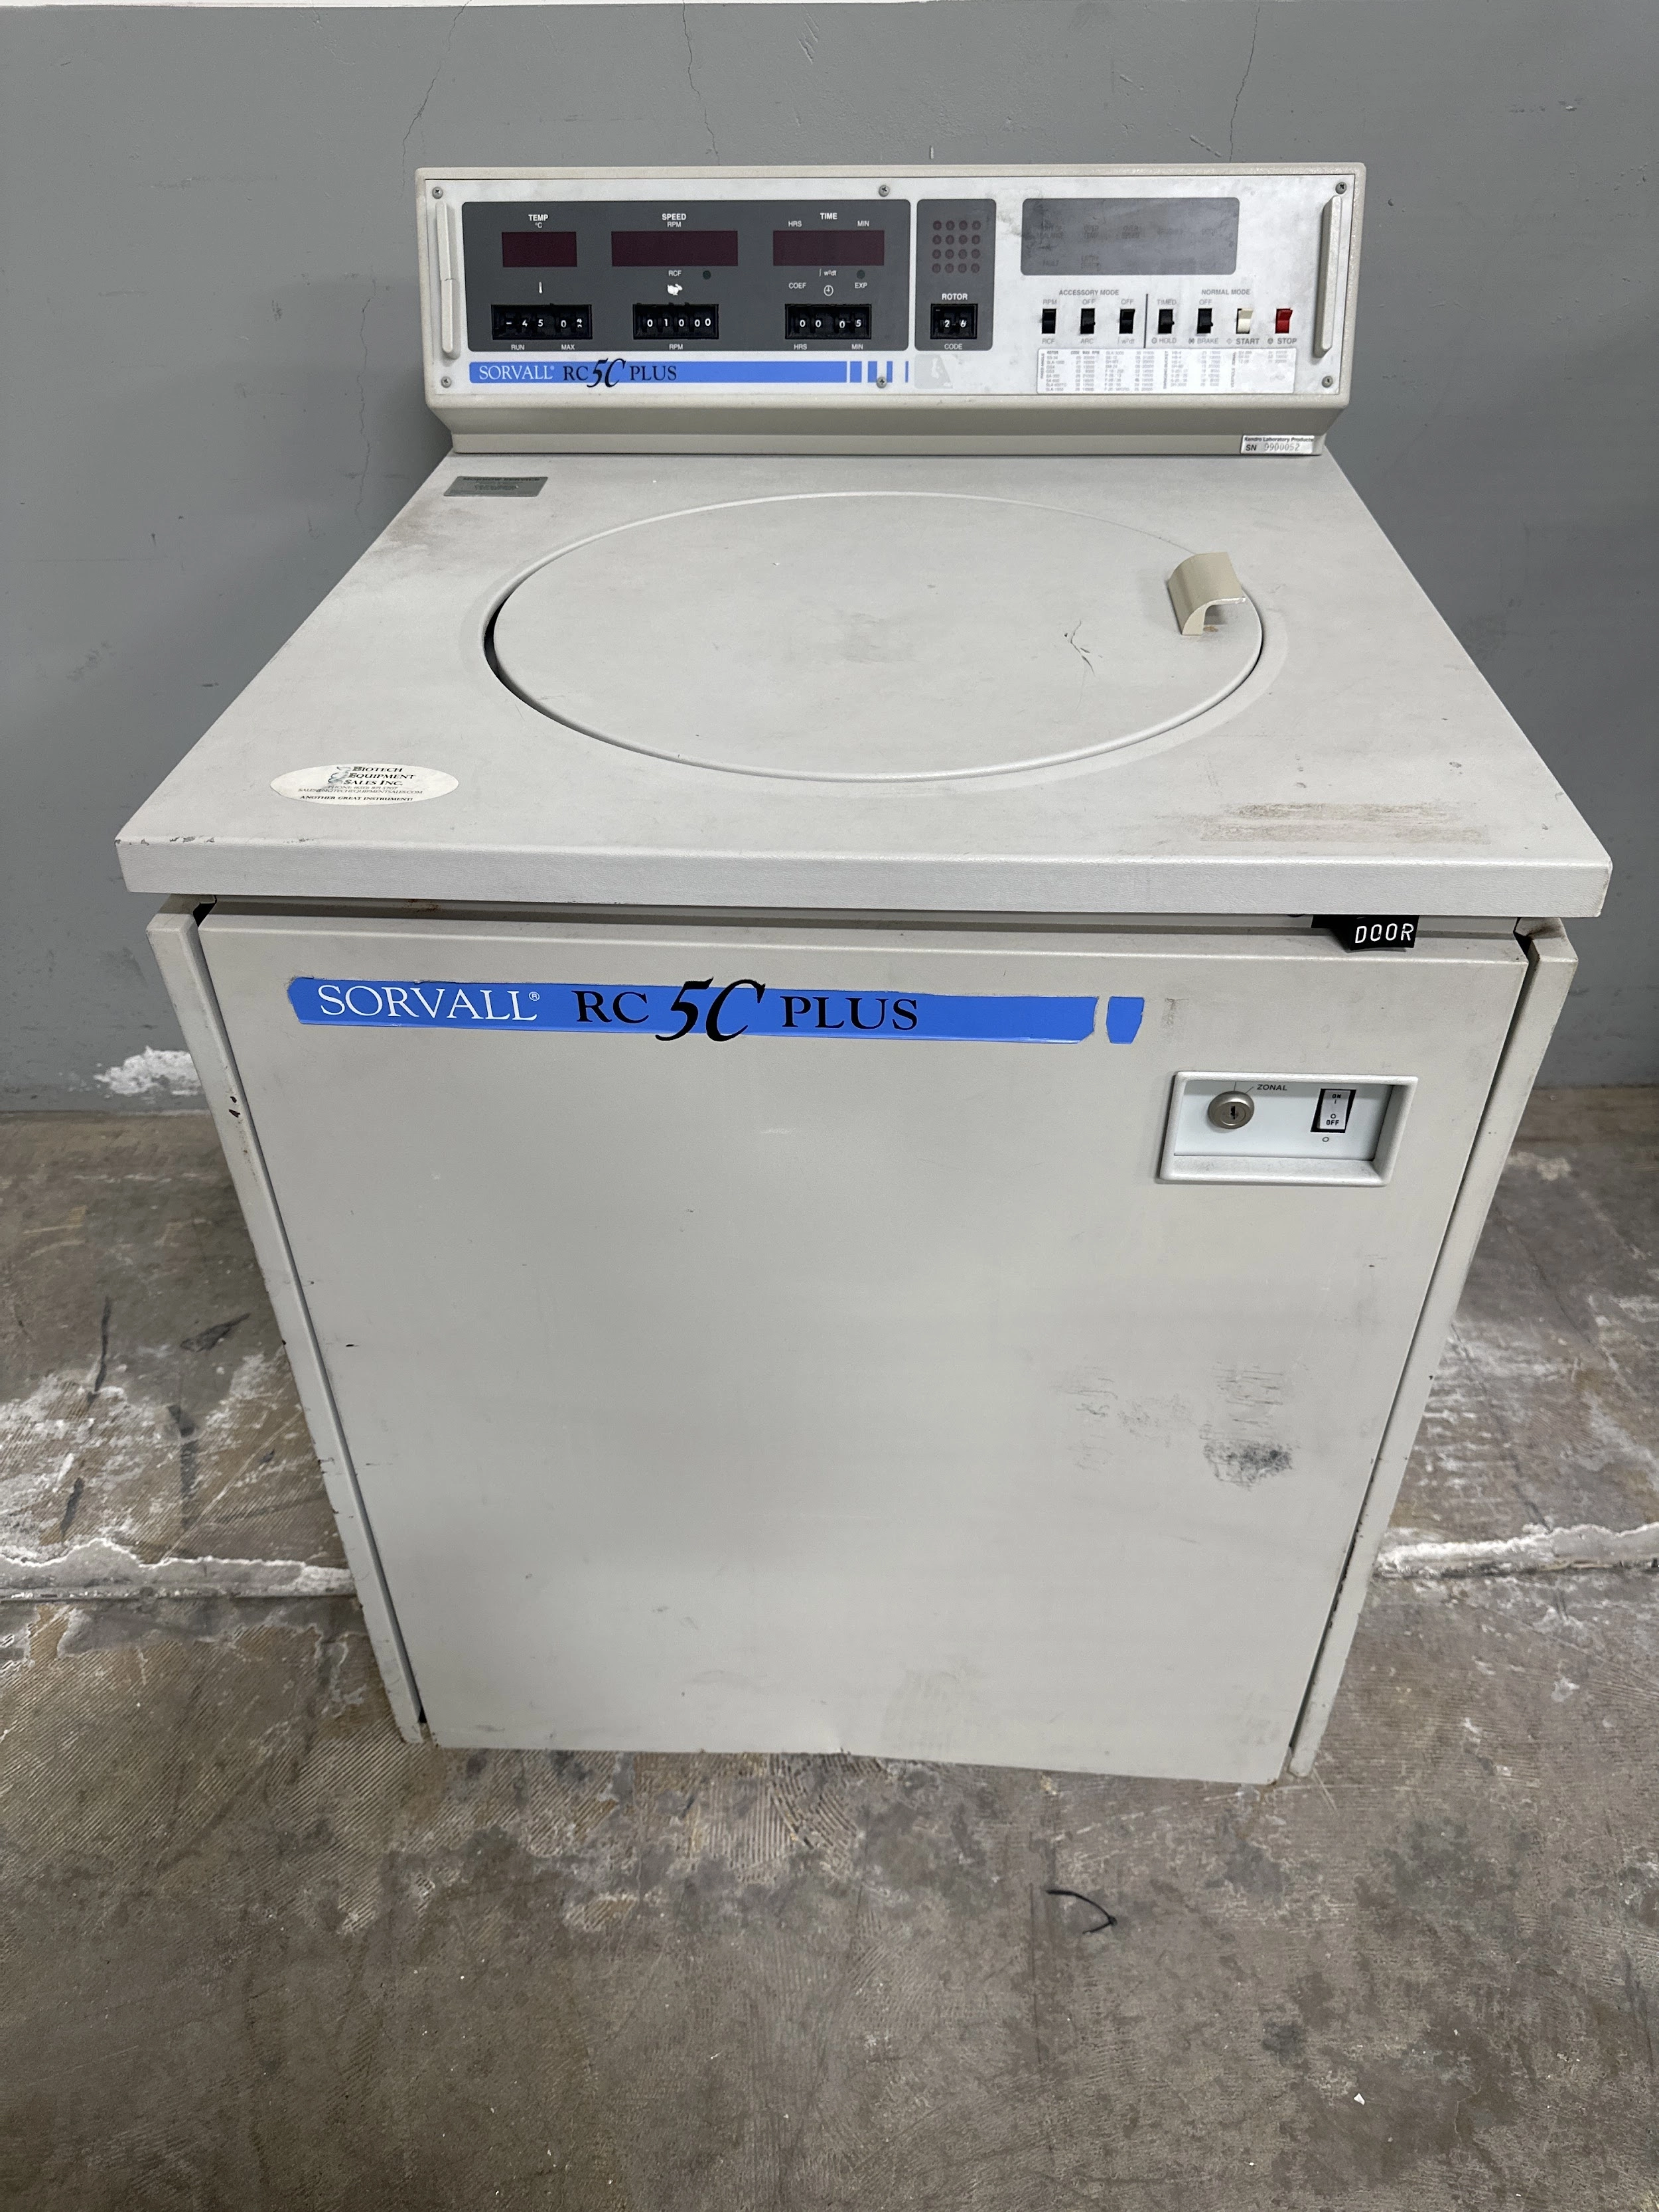 Sorvall RC5C Plus Refrigerated Centrifuge 21,000 RPM - No Rotor - AS IS